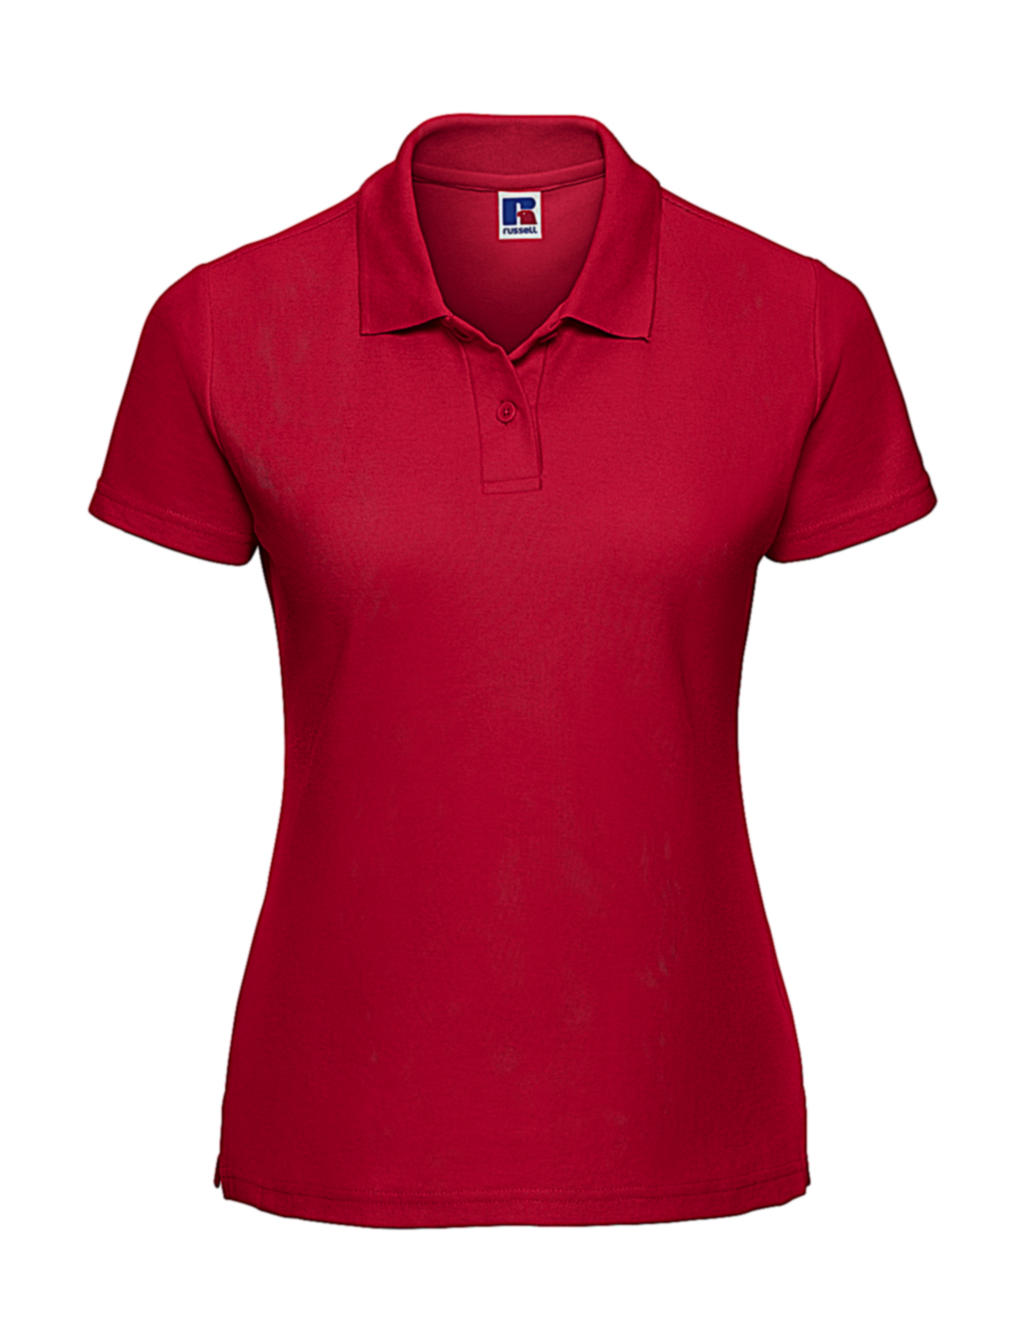  Ladies Classic Polycotton Polo in Farbe Classic Red